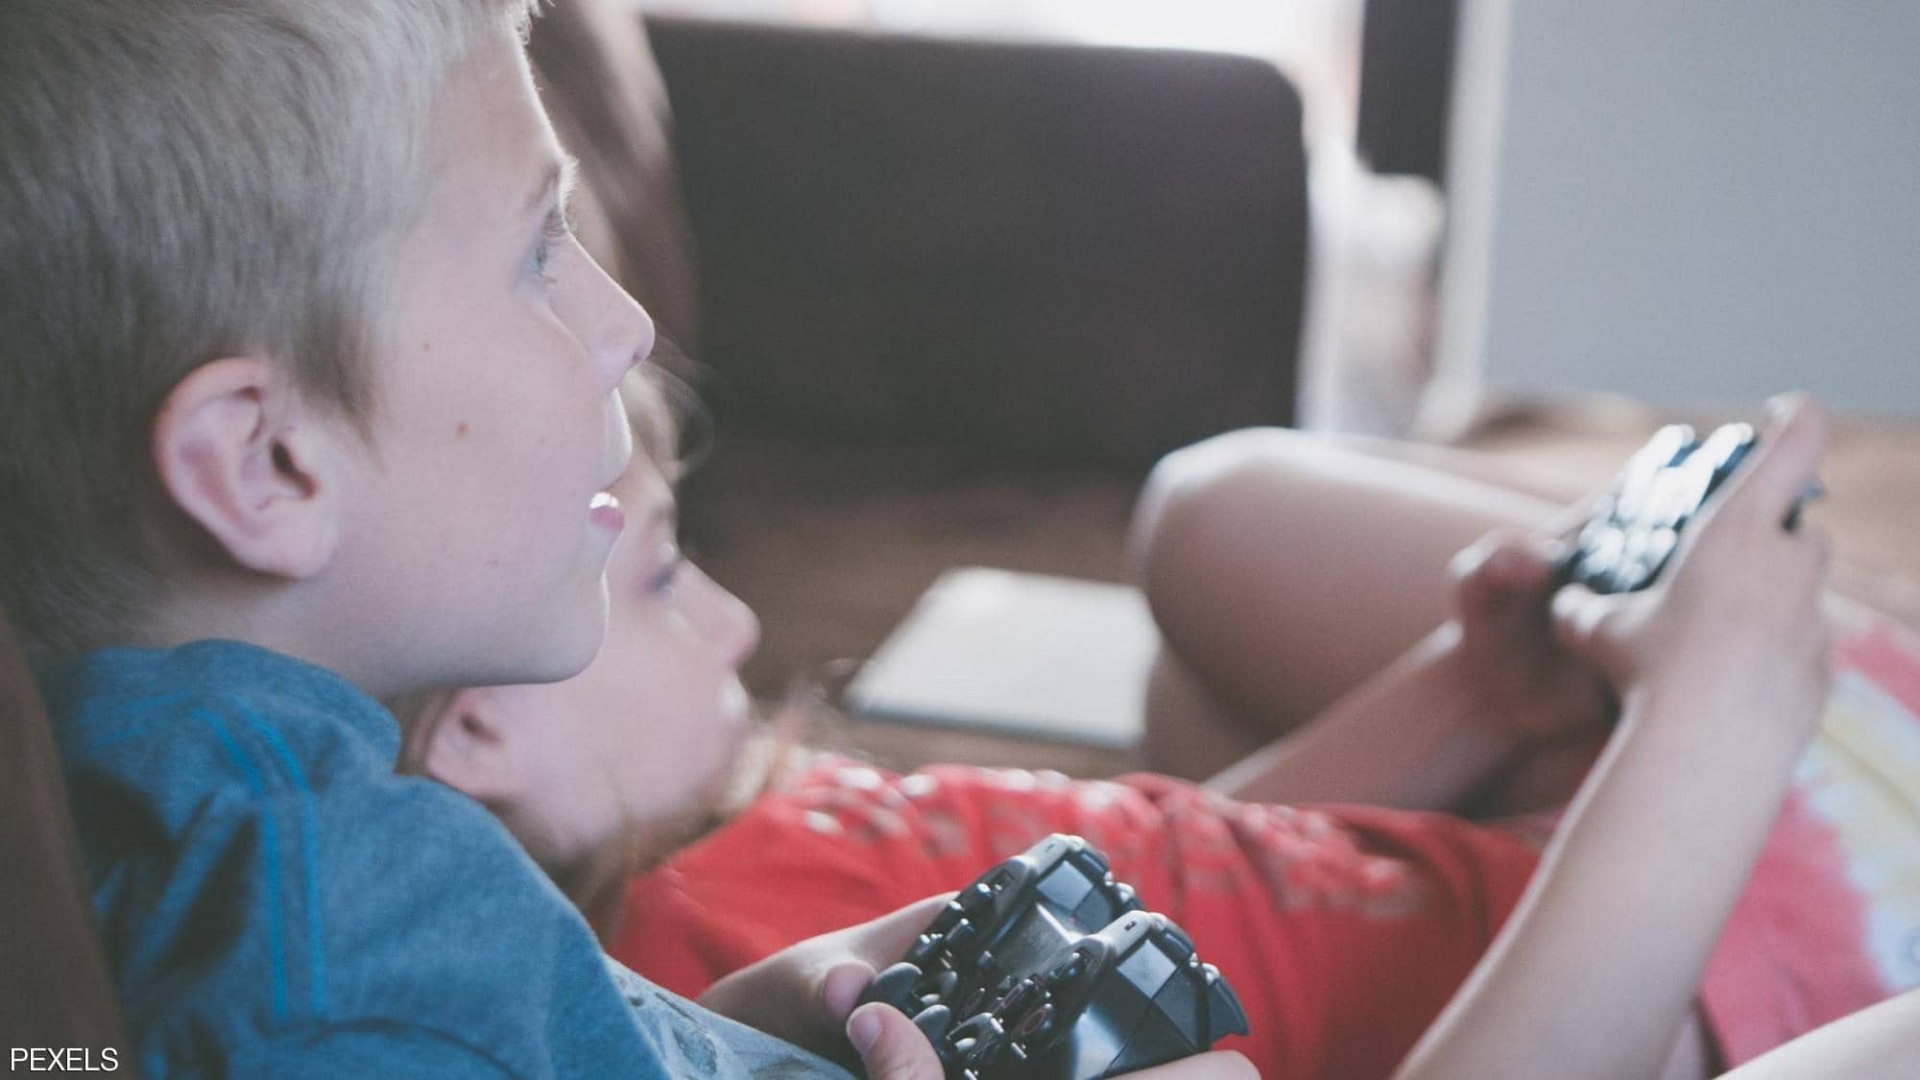 Playing video games BENEFITS mental health, Oxford University scientist claims